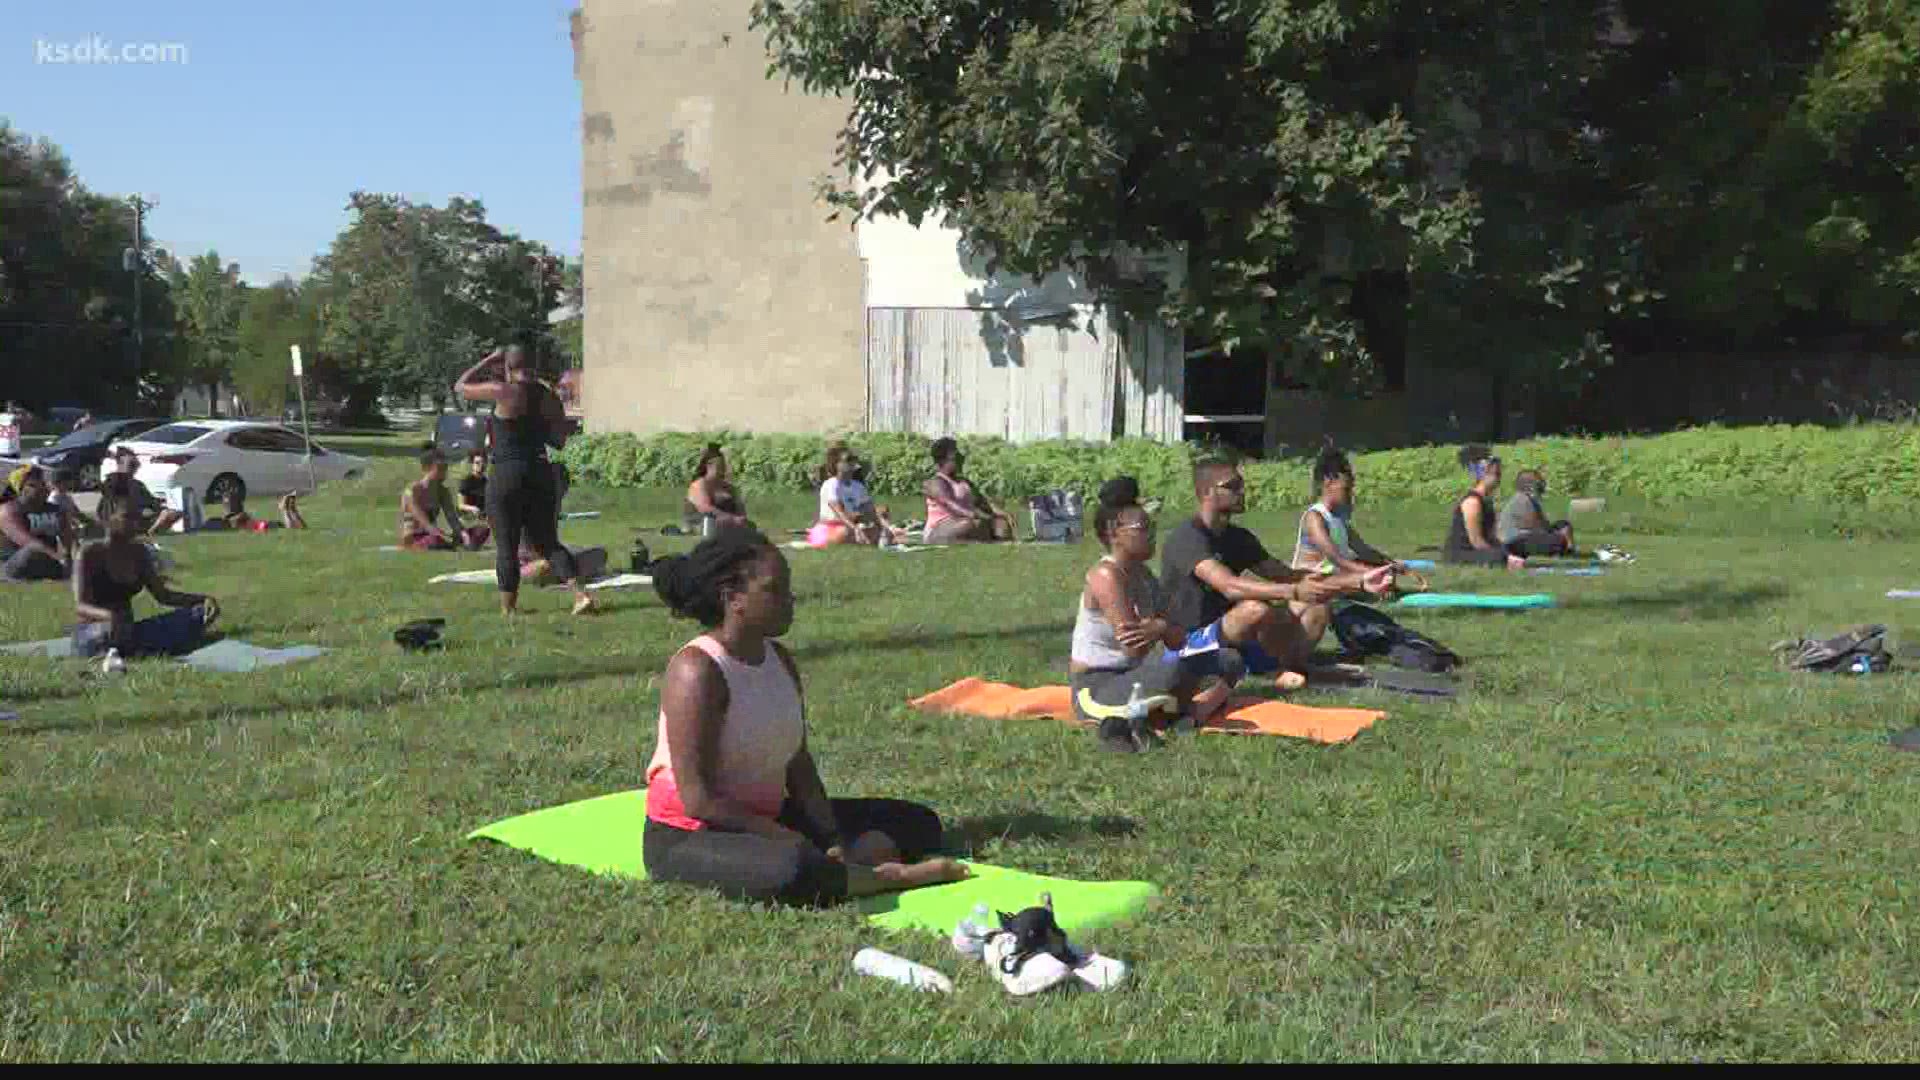 More people are giving yoga and meditation a shot to calm the stresses of the past year.